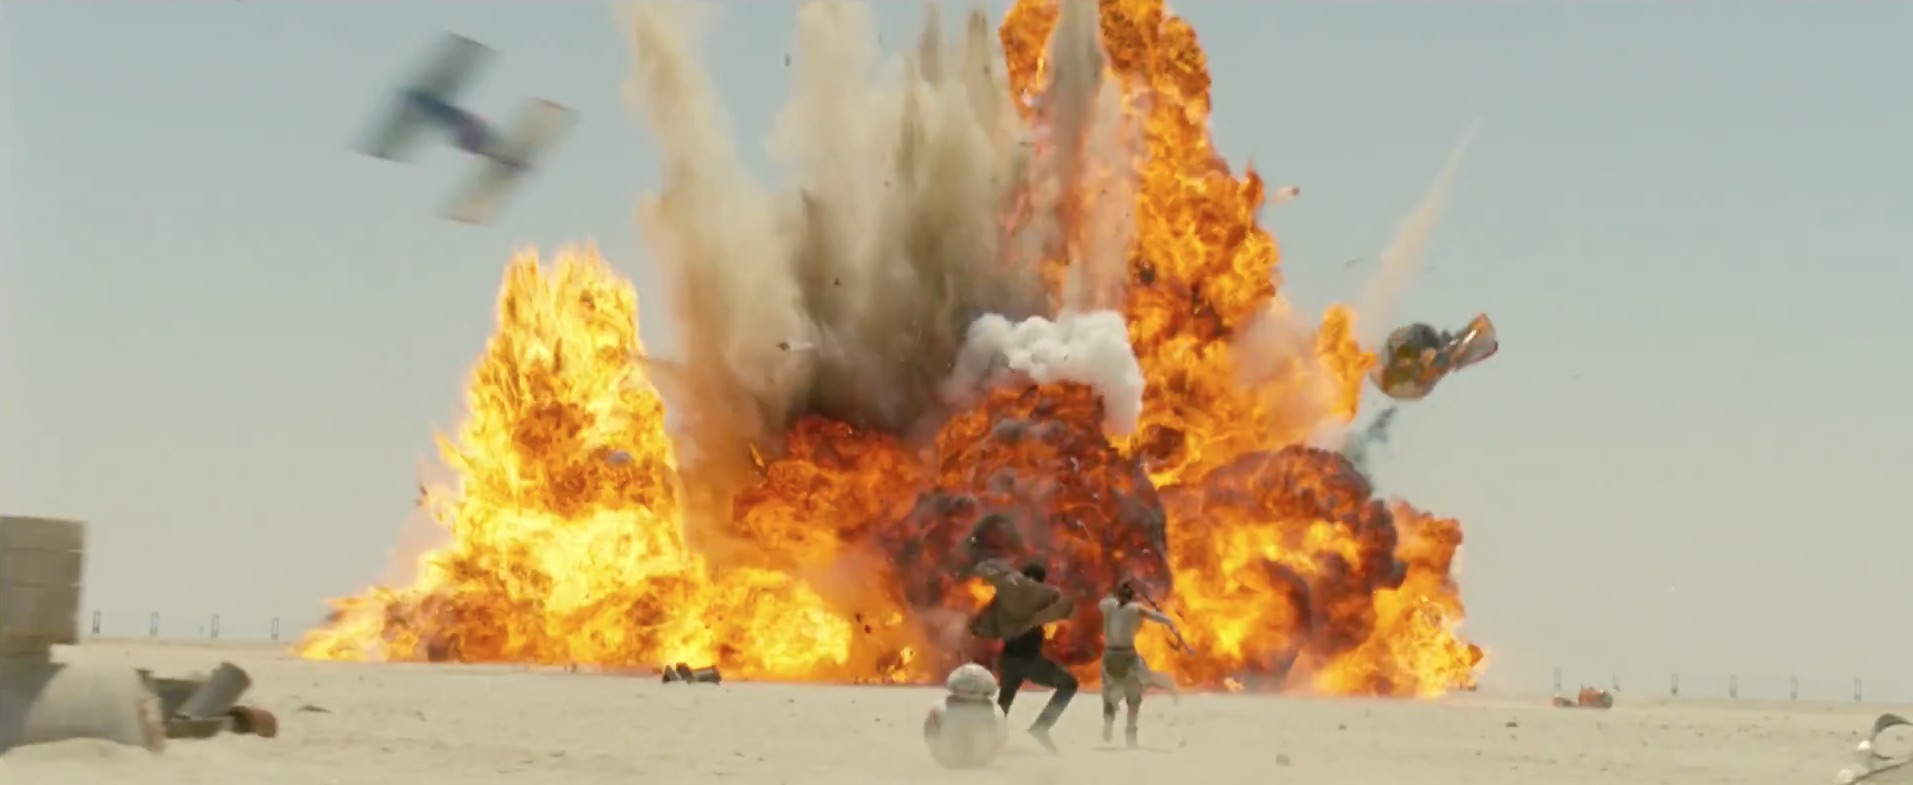 A TIE Fighter causes an explosion, as Rey and Finn run away